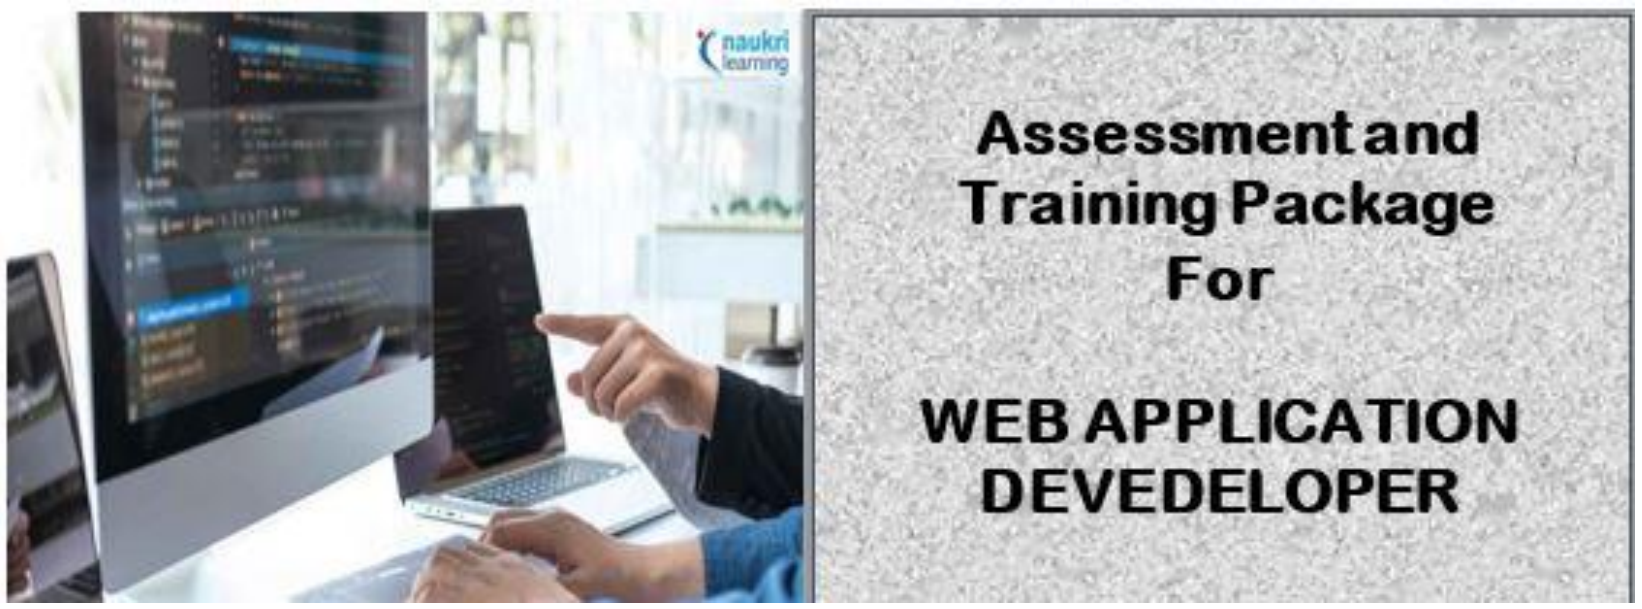 DIT-ASSESSMENT AND TRAINING PACKAGE FOR A WEB APPLICATION DEVELOPER